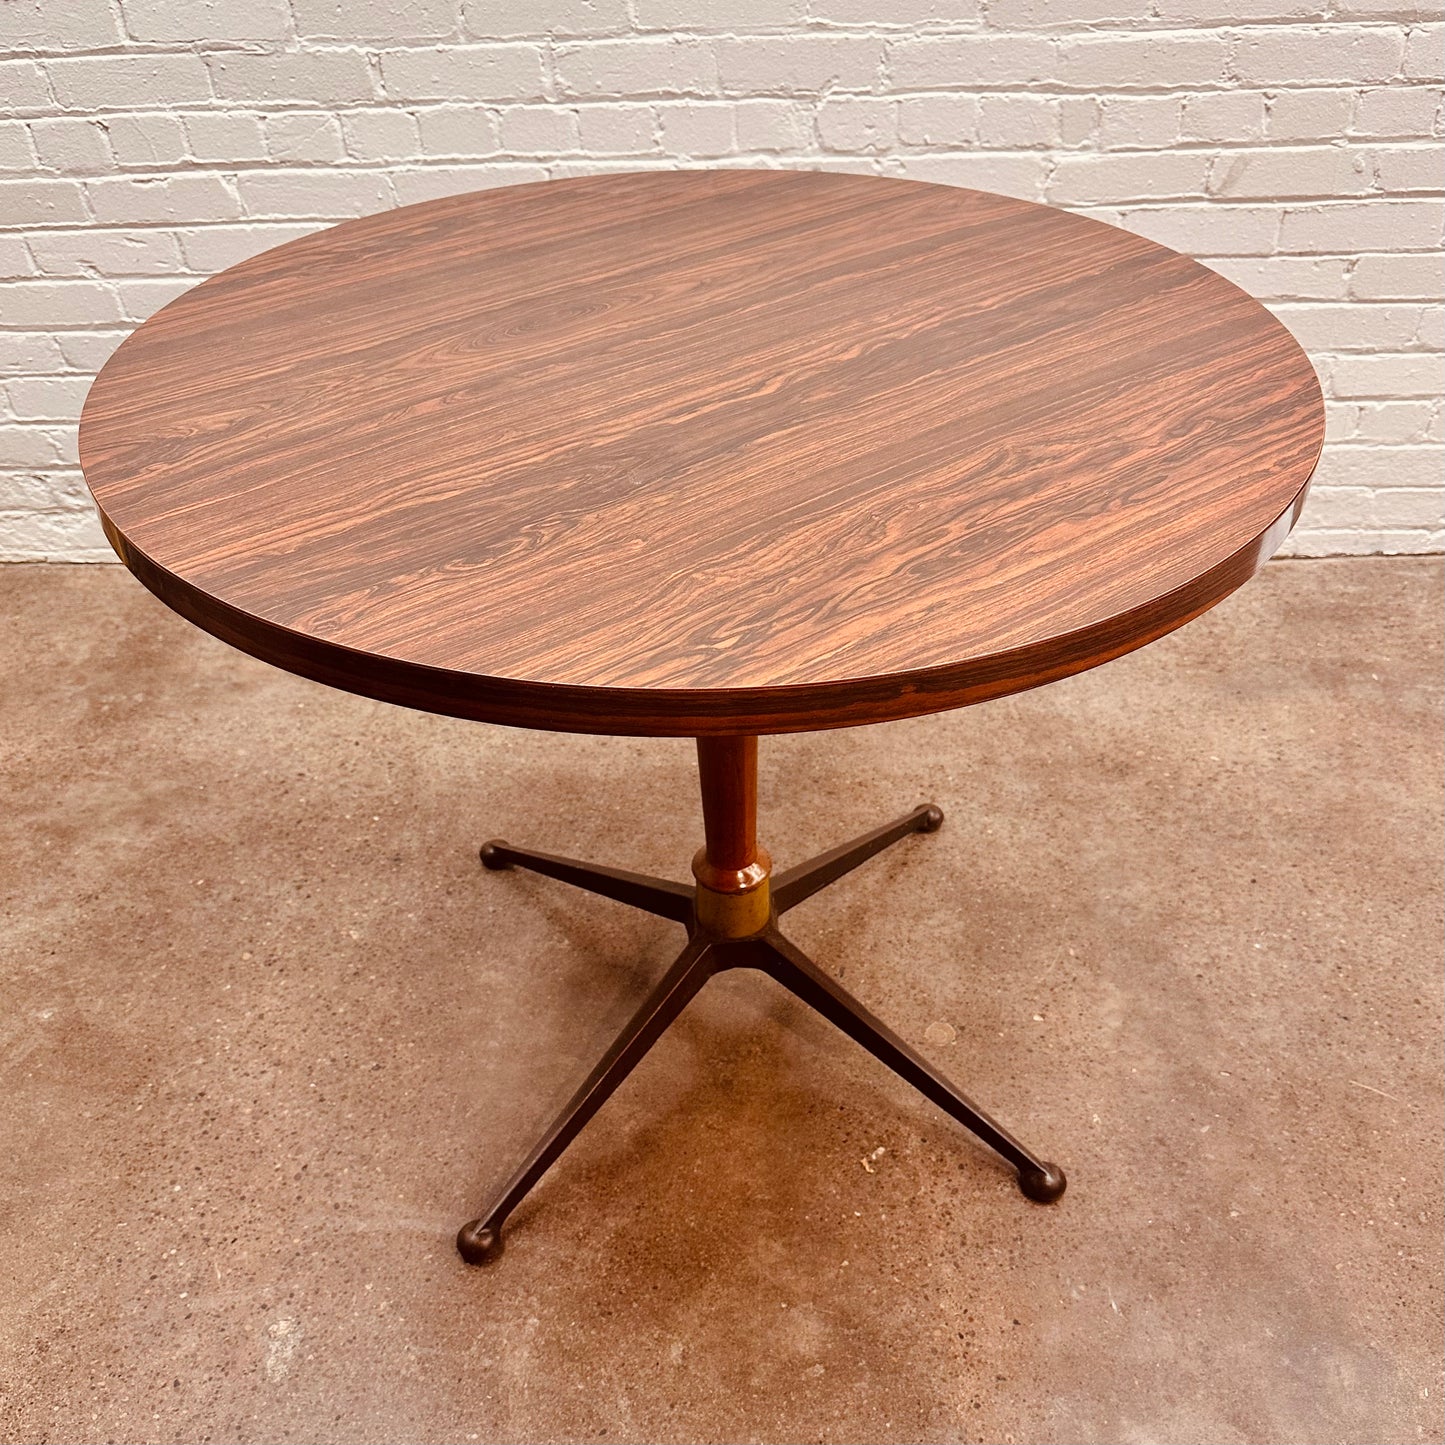 ROUND ROSEWOOD LAMINATE 36” CAFE TABLE W/ STEEL LEGS